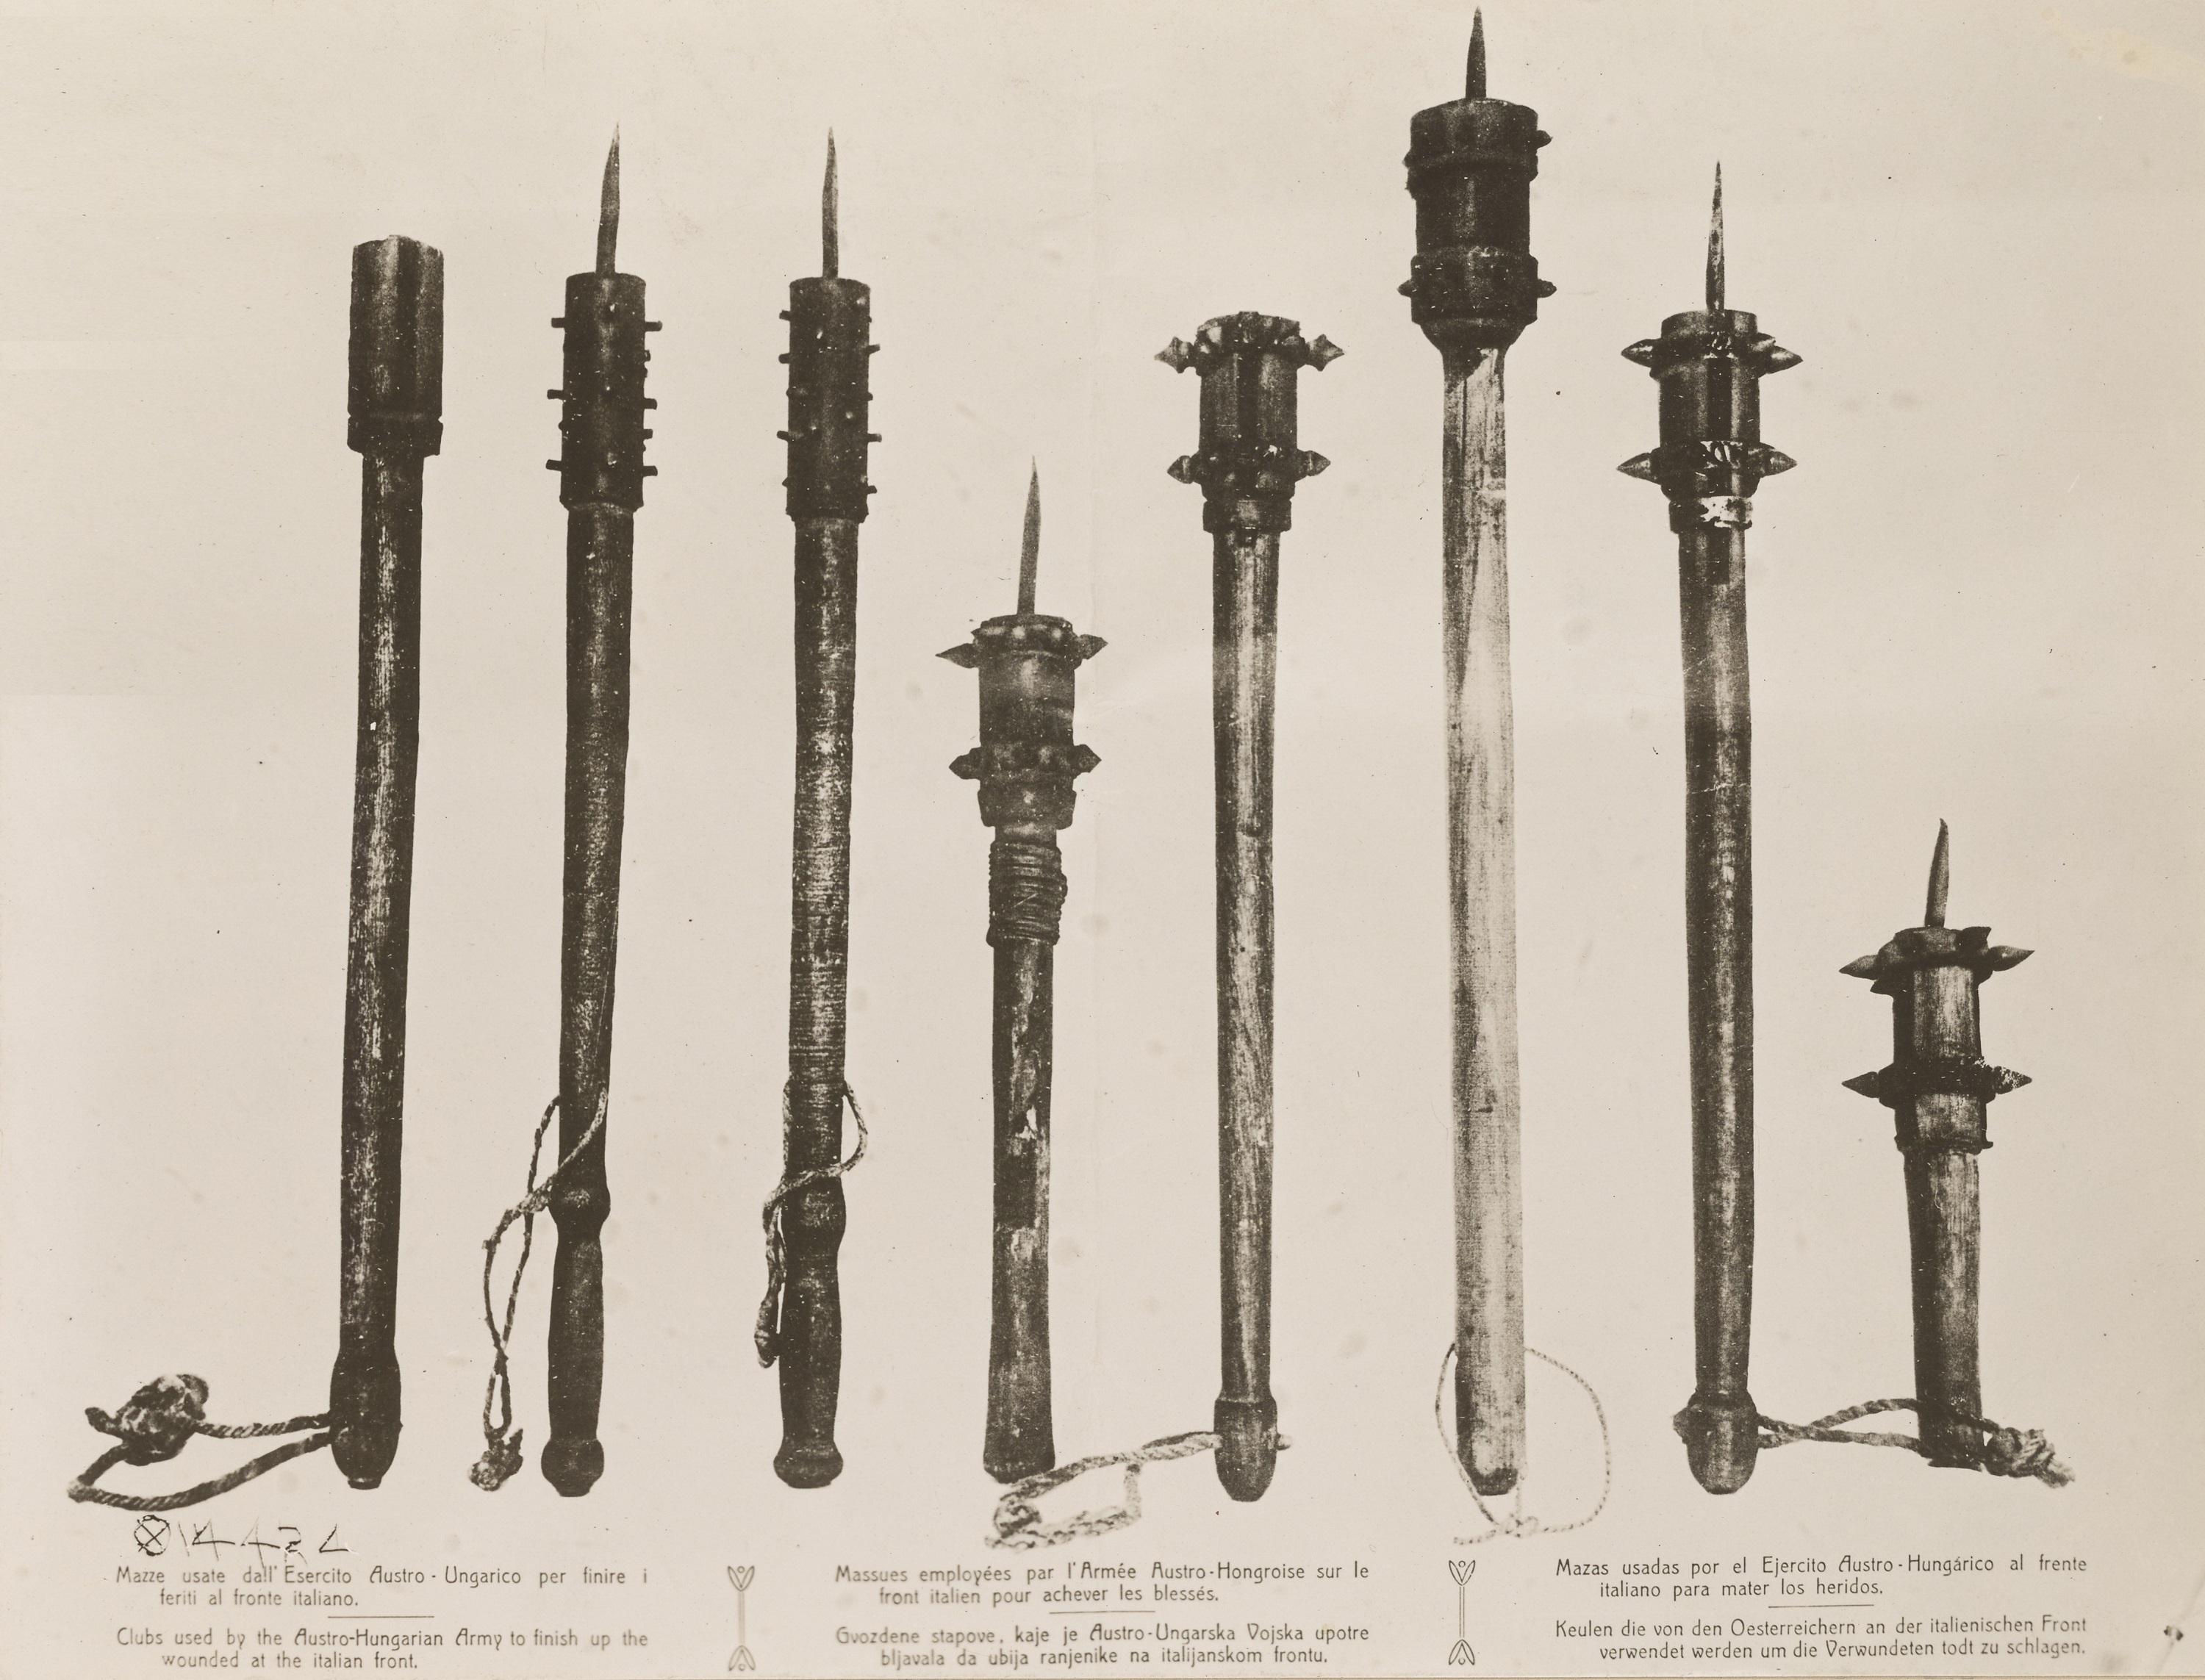 Medieval style maces and clubs used by Austro-Hungarian army for trench combat during WW1, 1914-1918.jpg